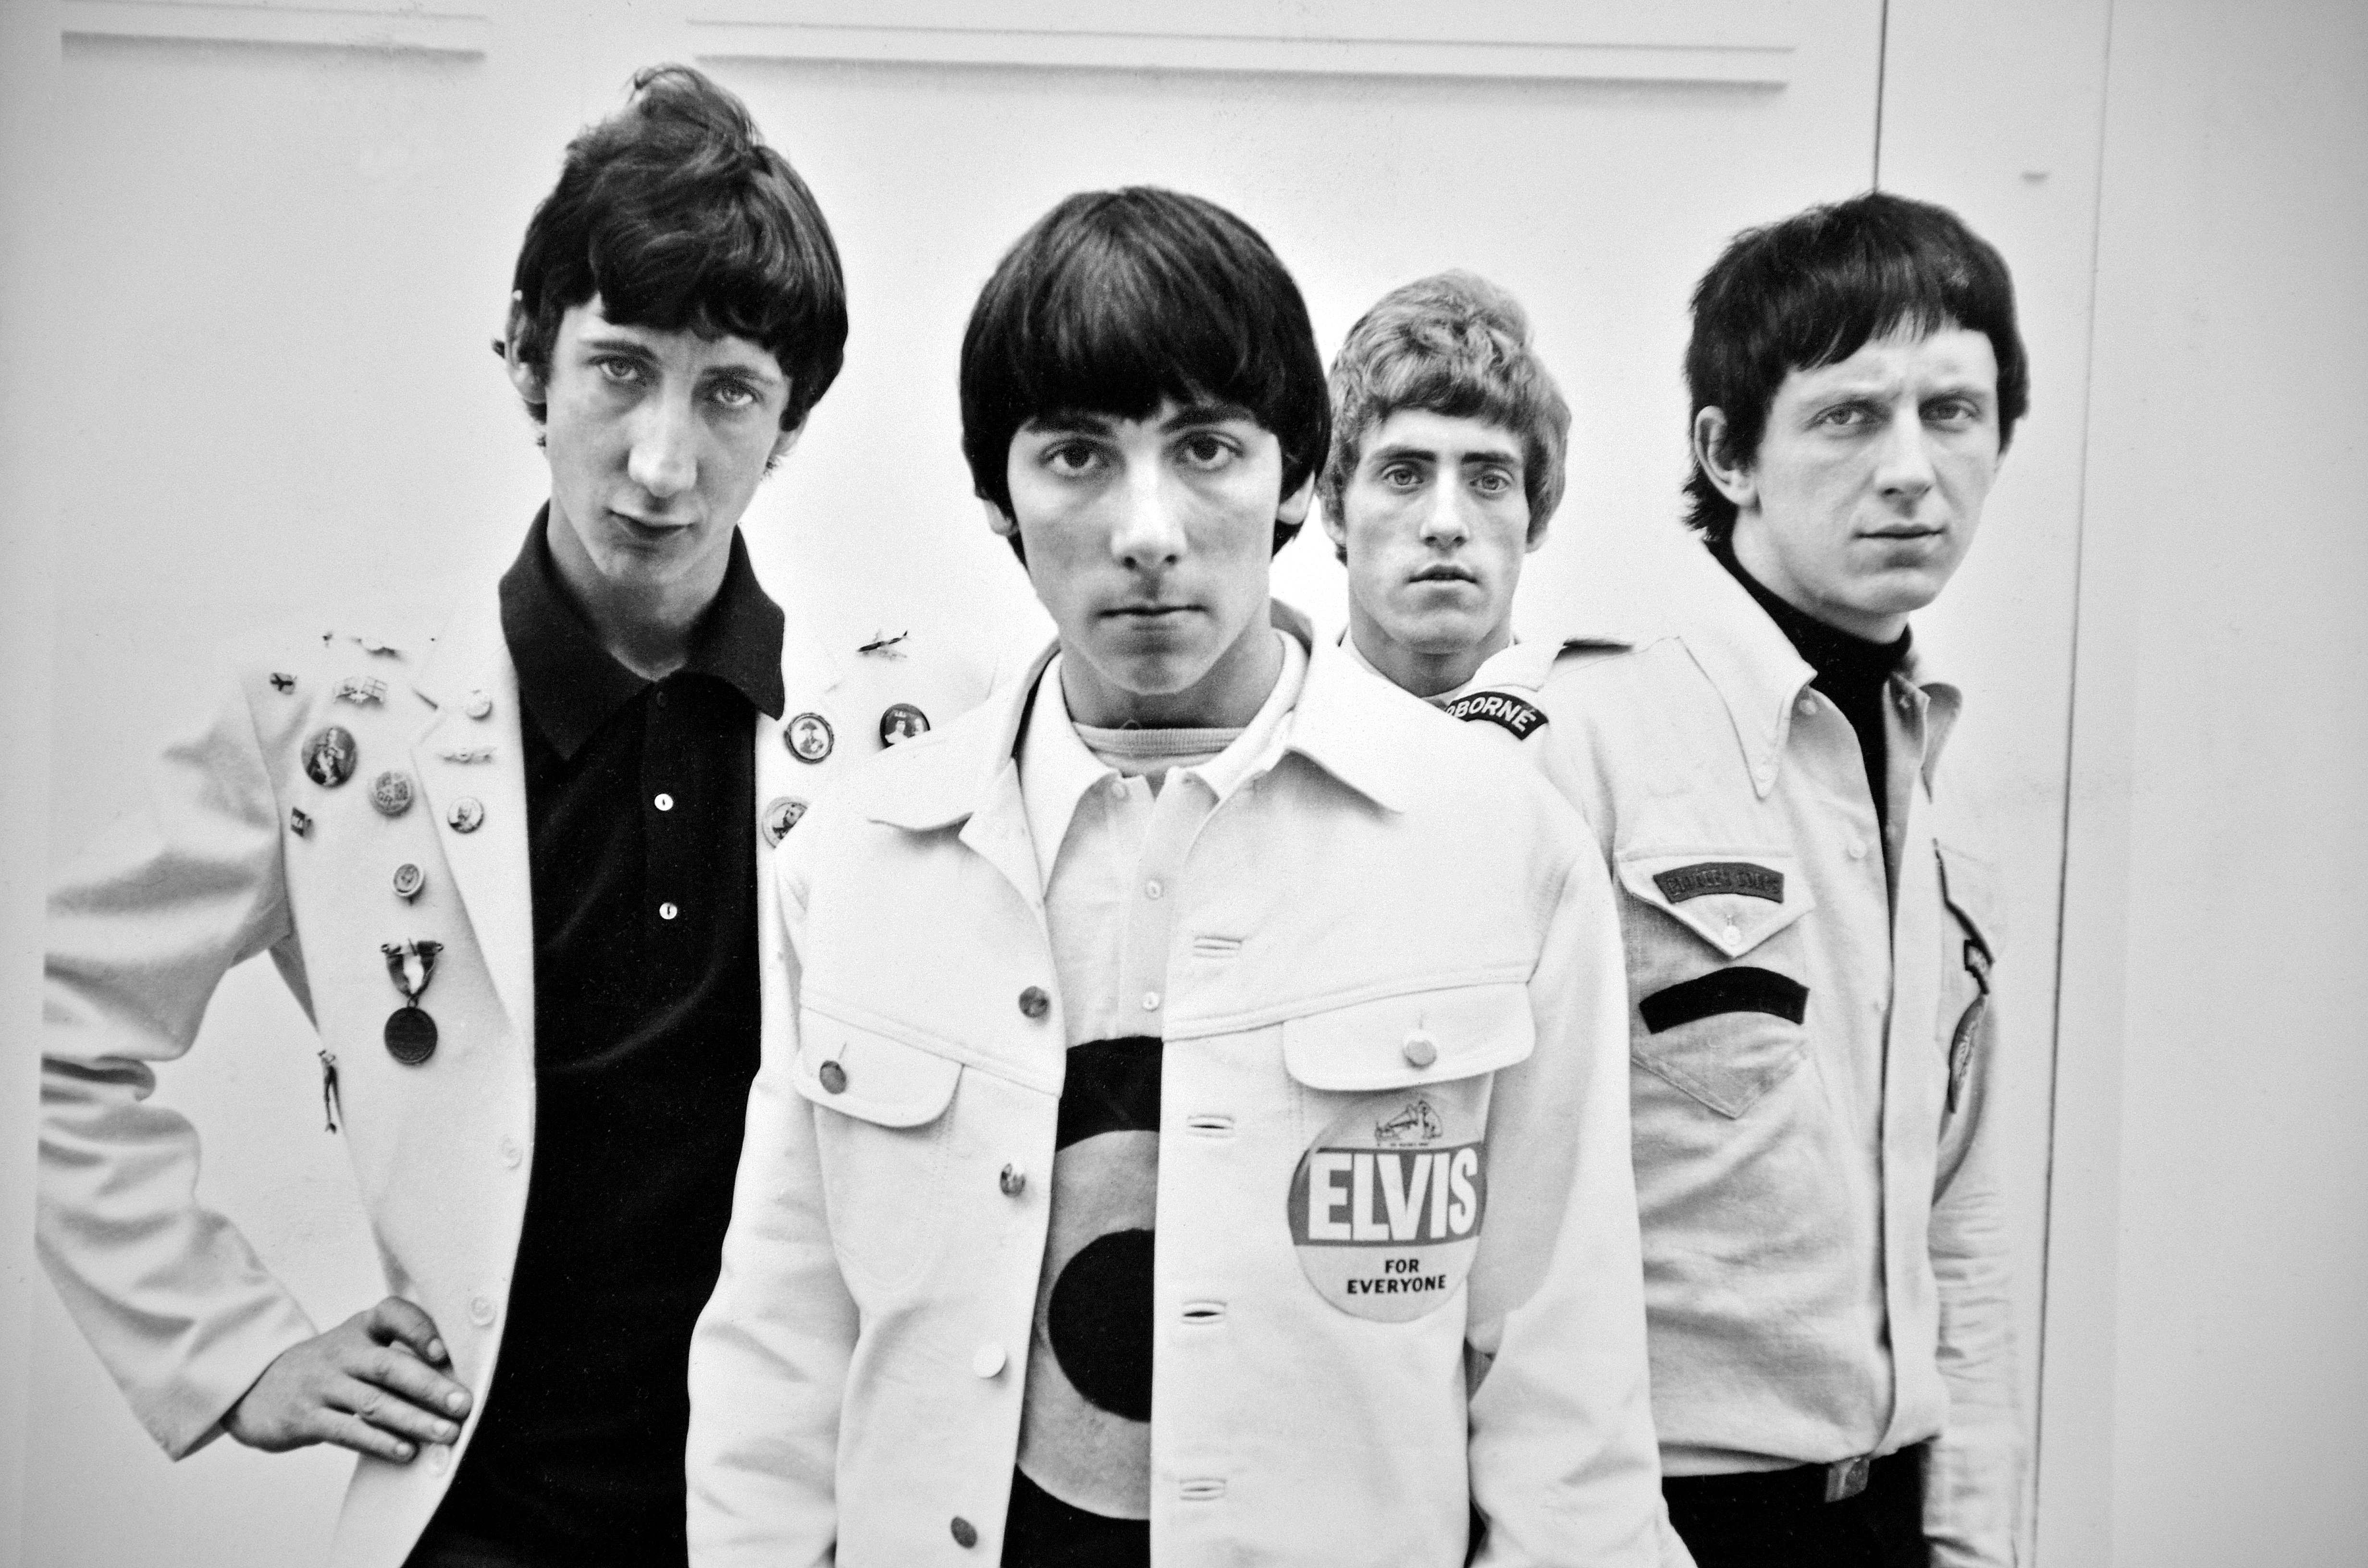 The Who's Pete Townshend, Keith Moon, Roger Daltrey and John Entwistle wearing collared shirts